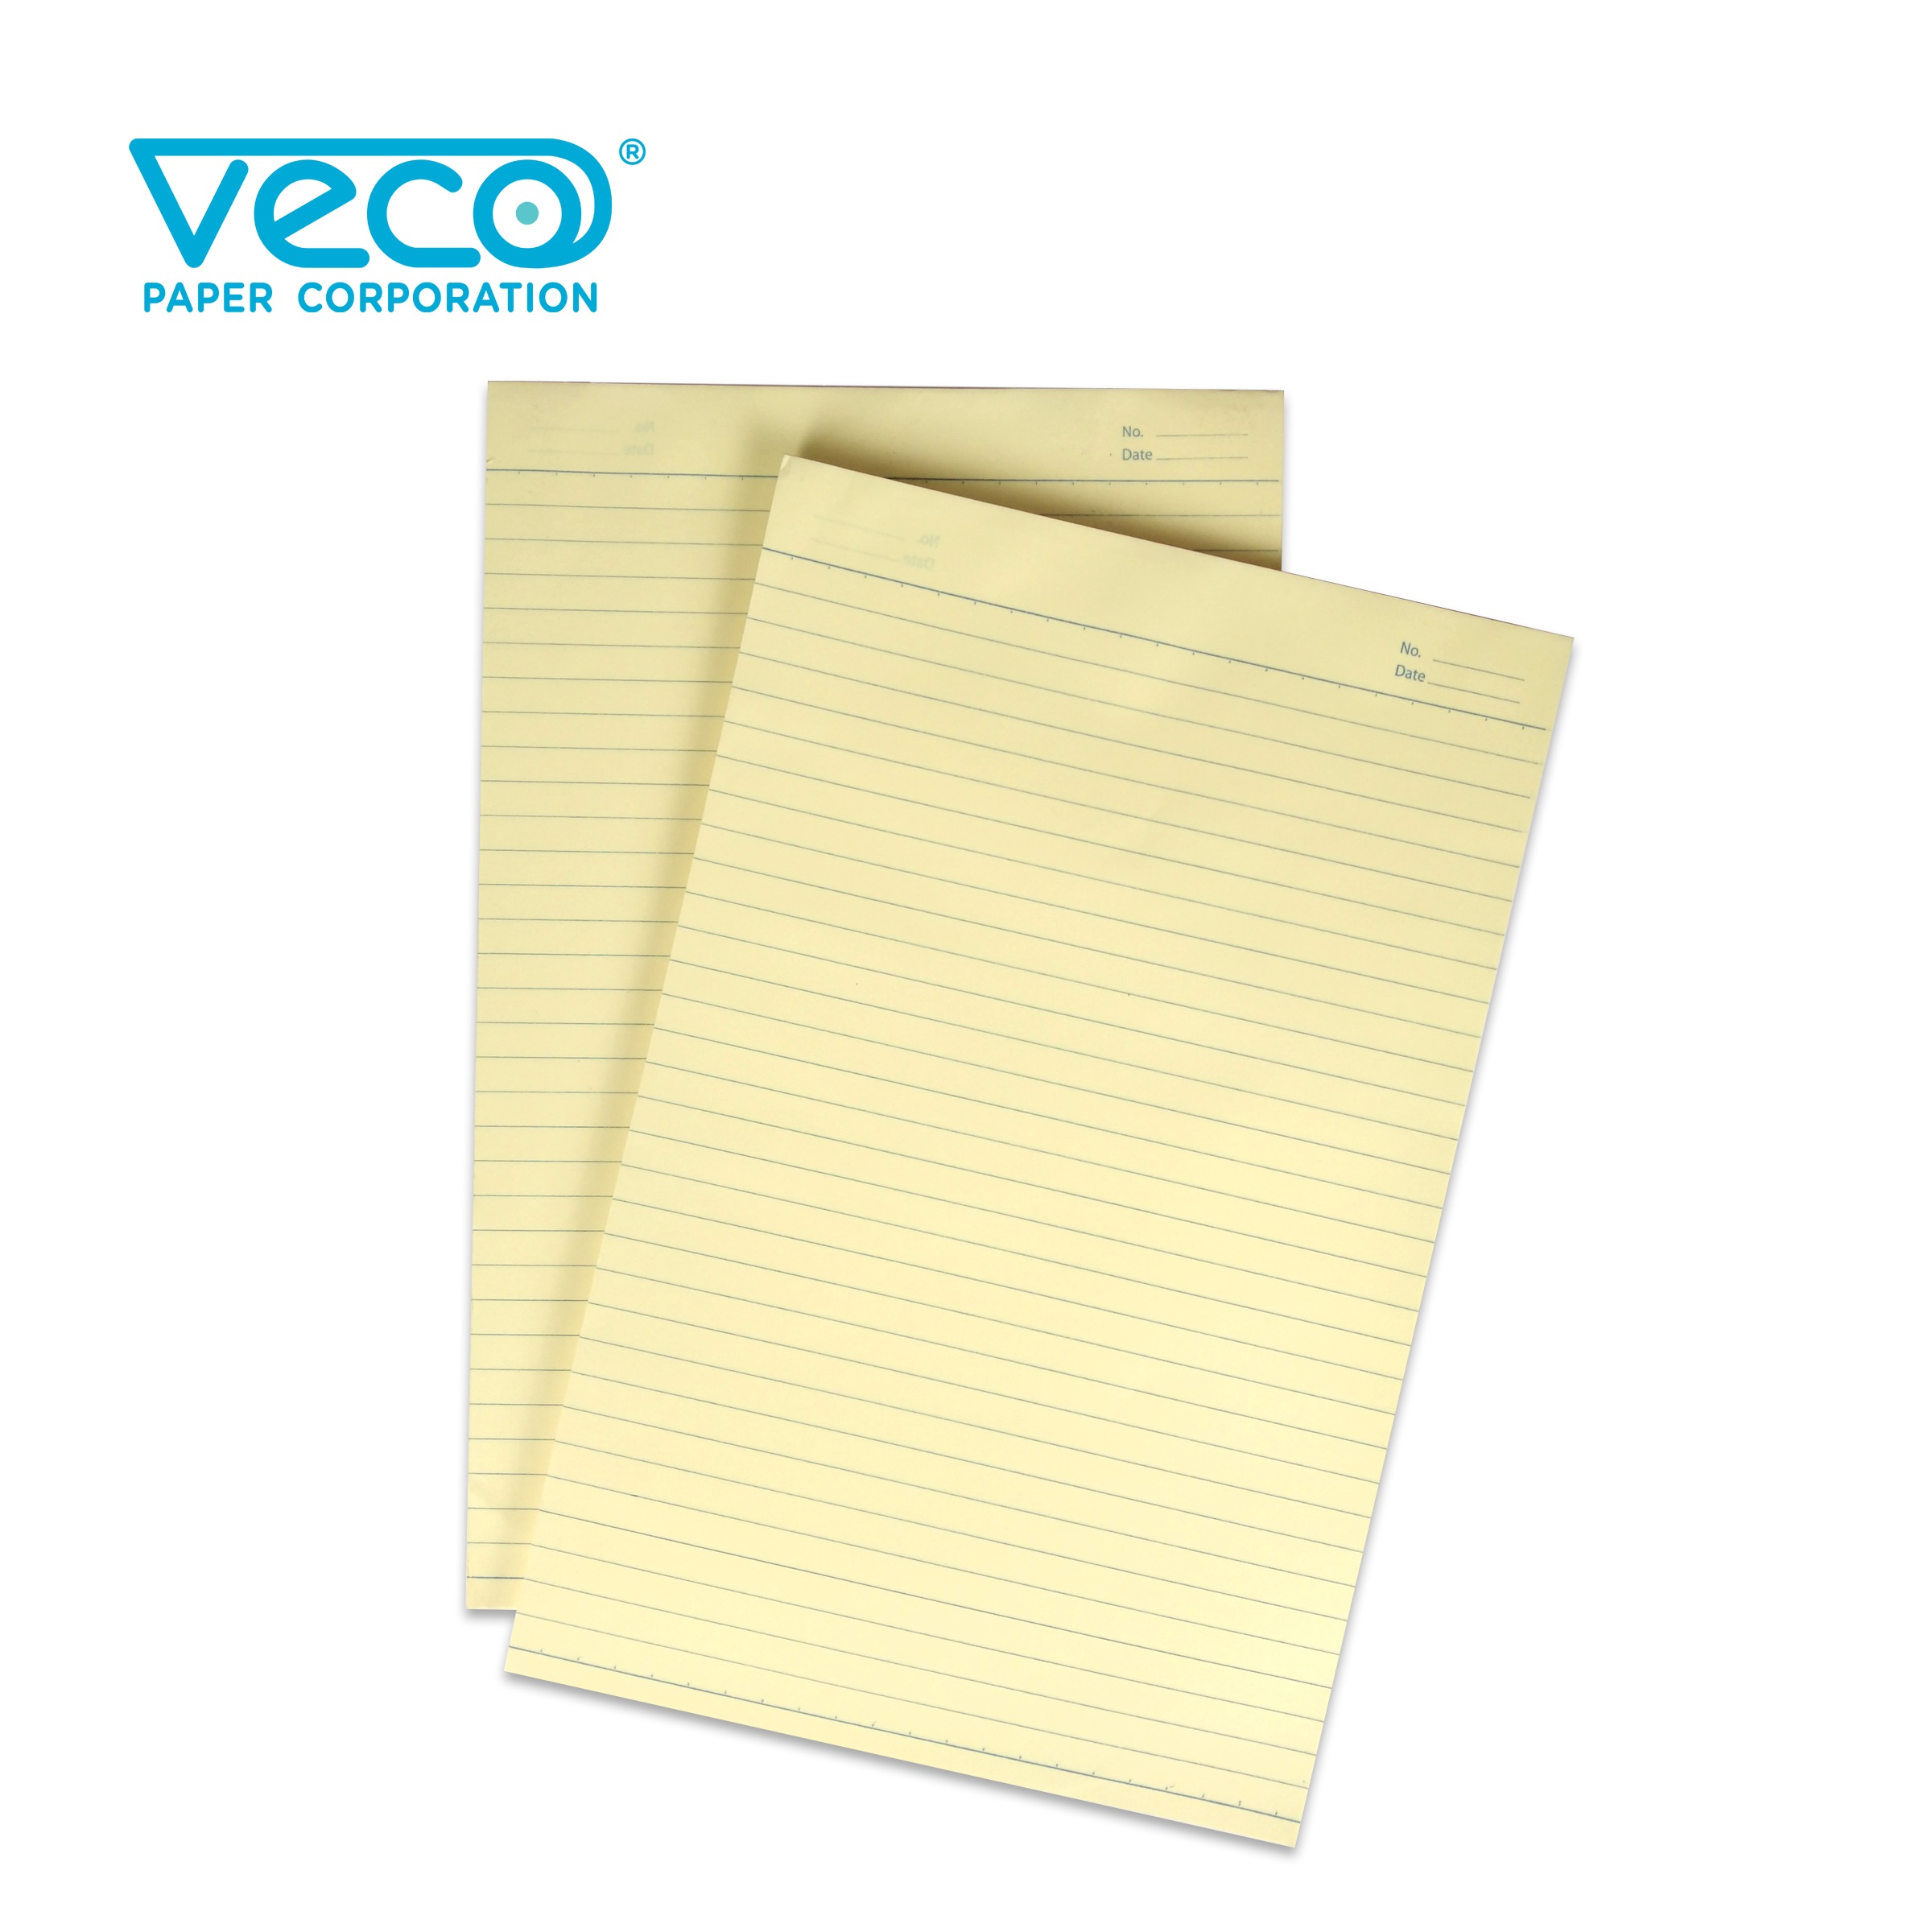 veco-yellow-pad-paper-available-size-one-whole-crosswise-lengthwise